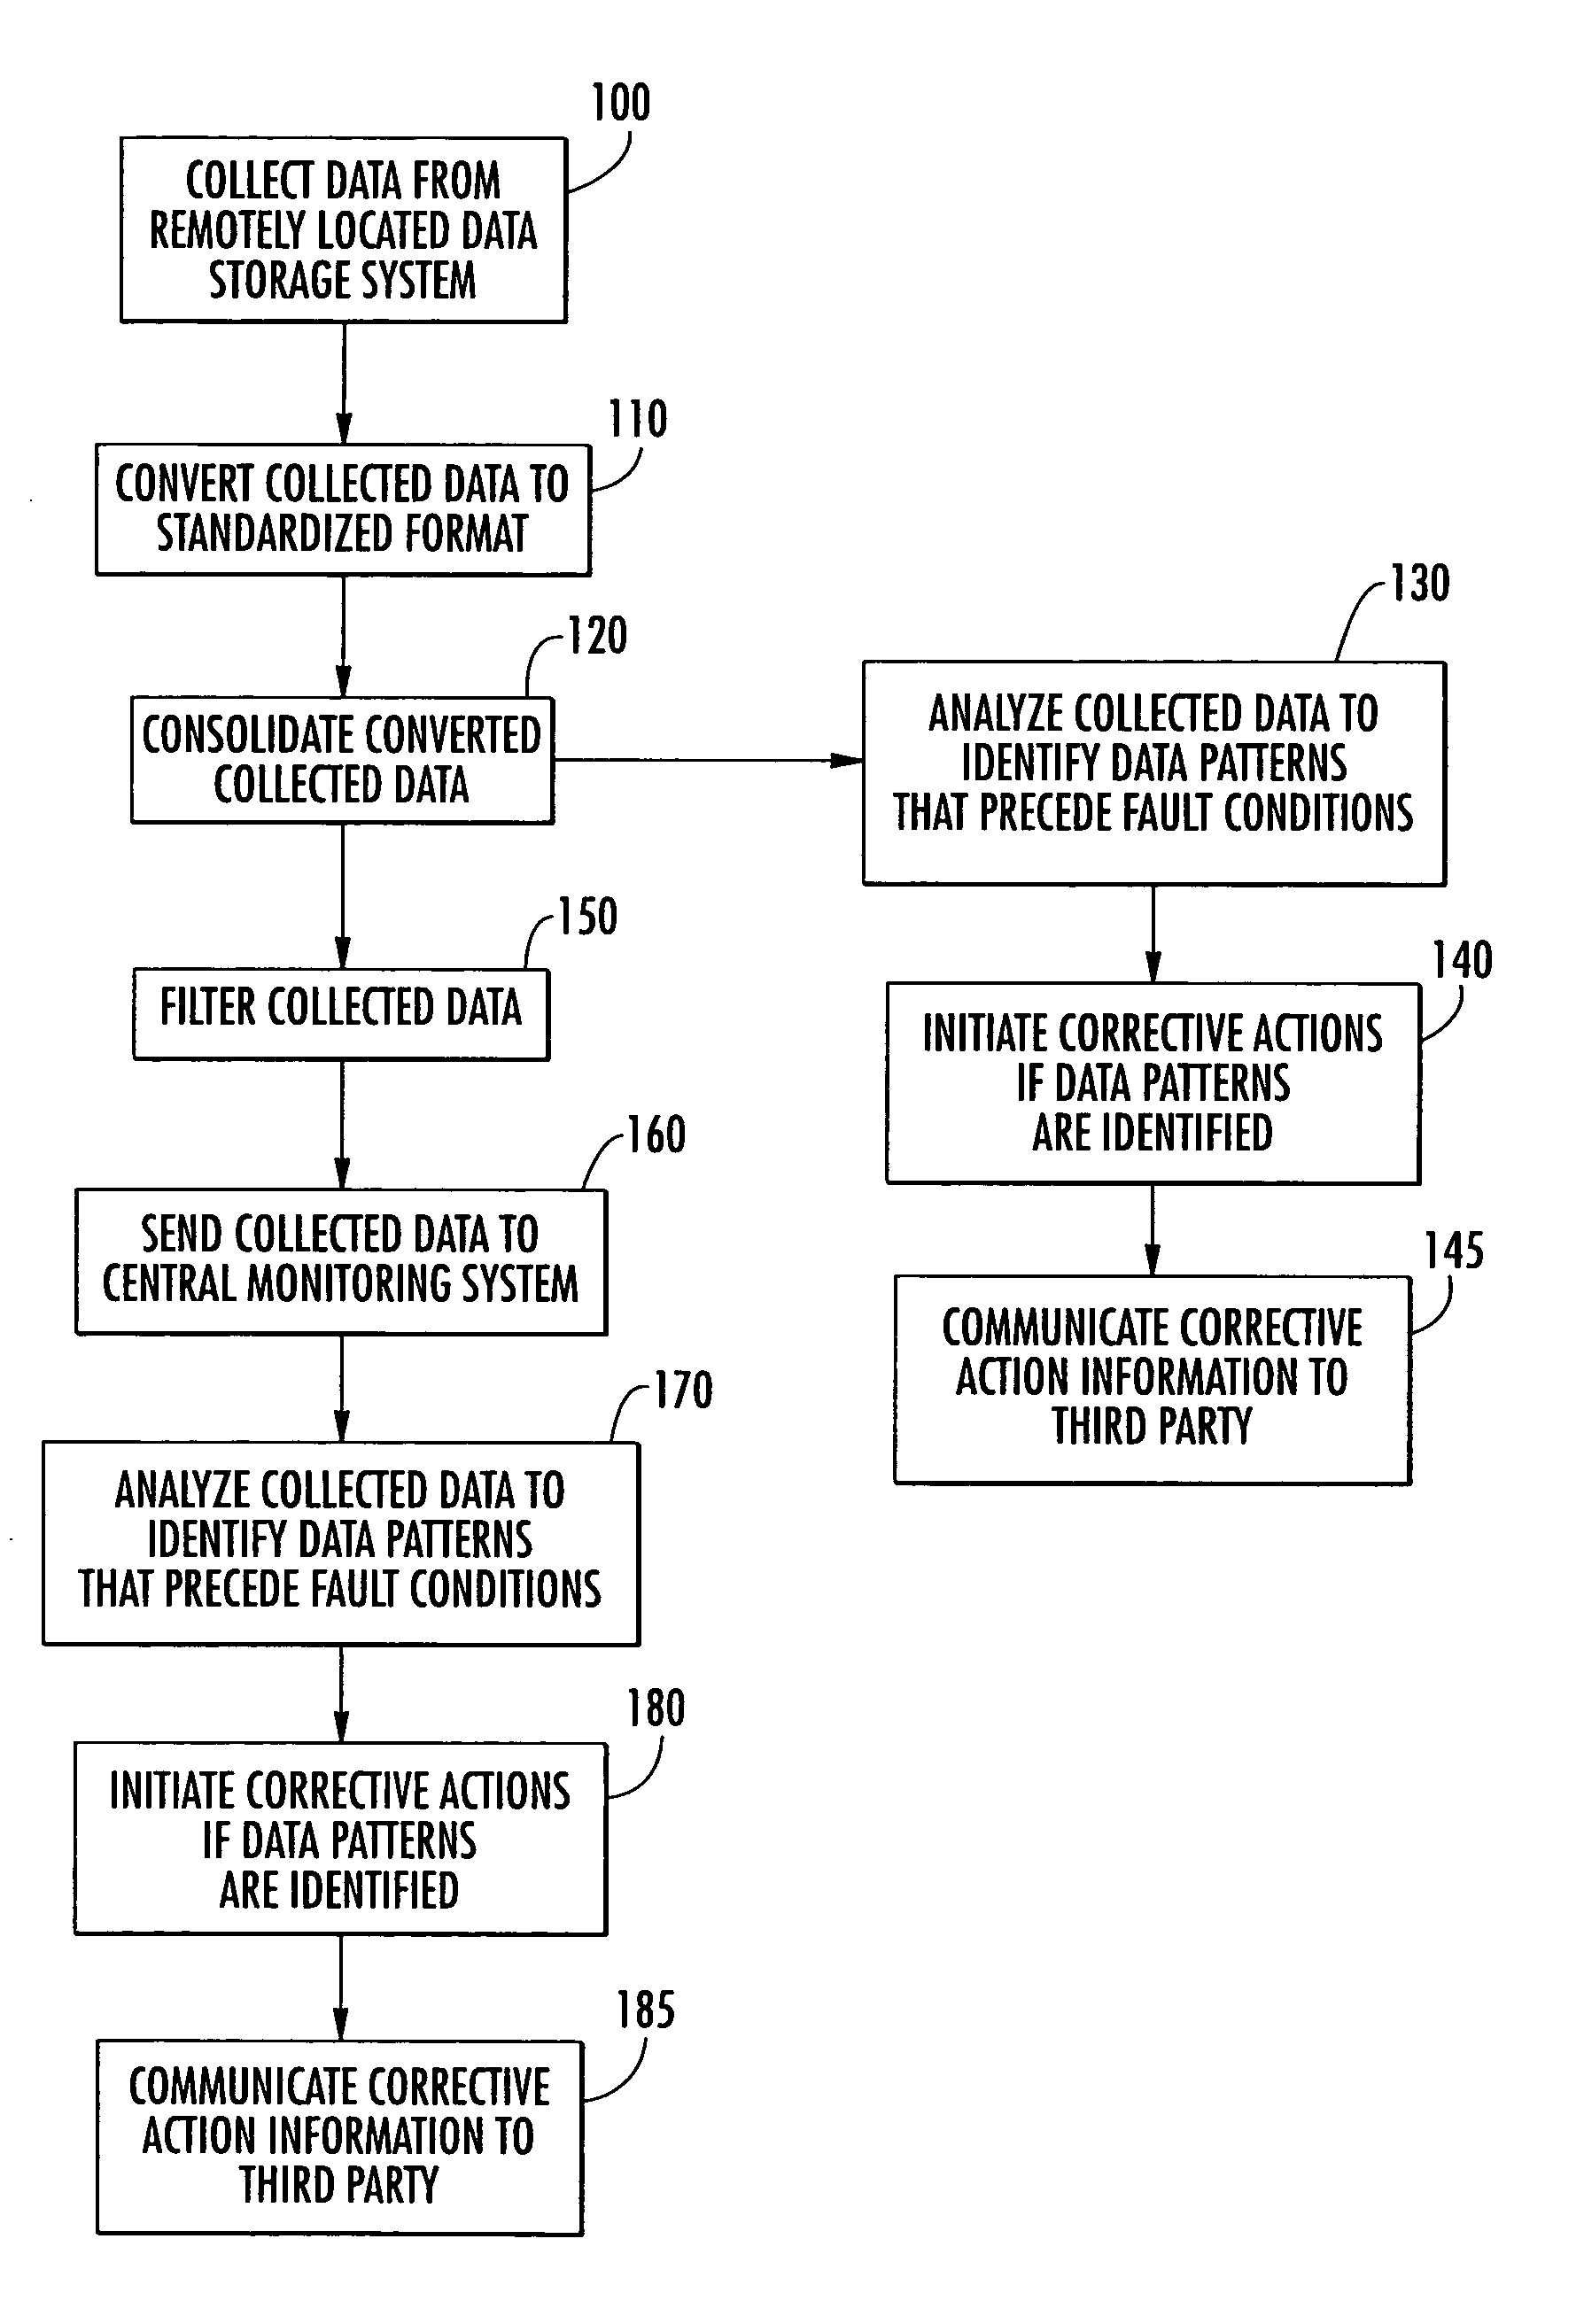 Systems, methods and computer program products for managing a plurality of remotely located data storage systems